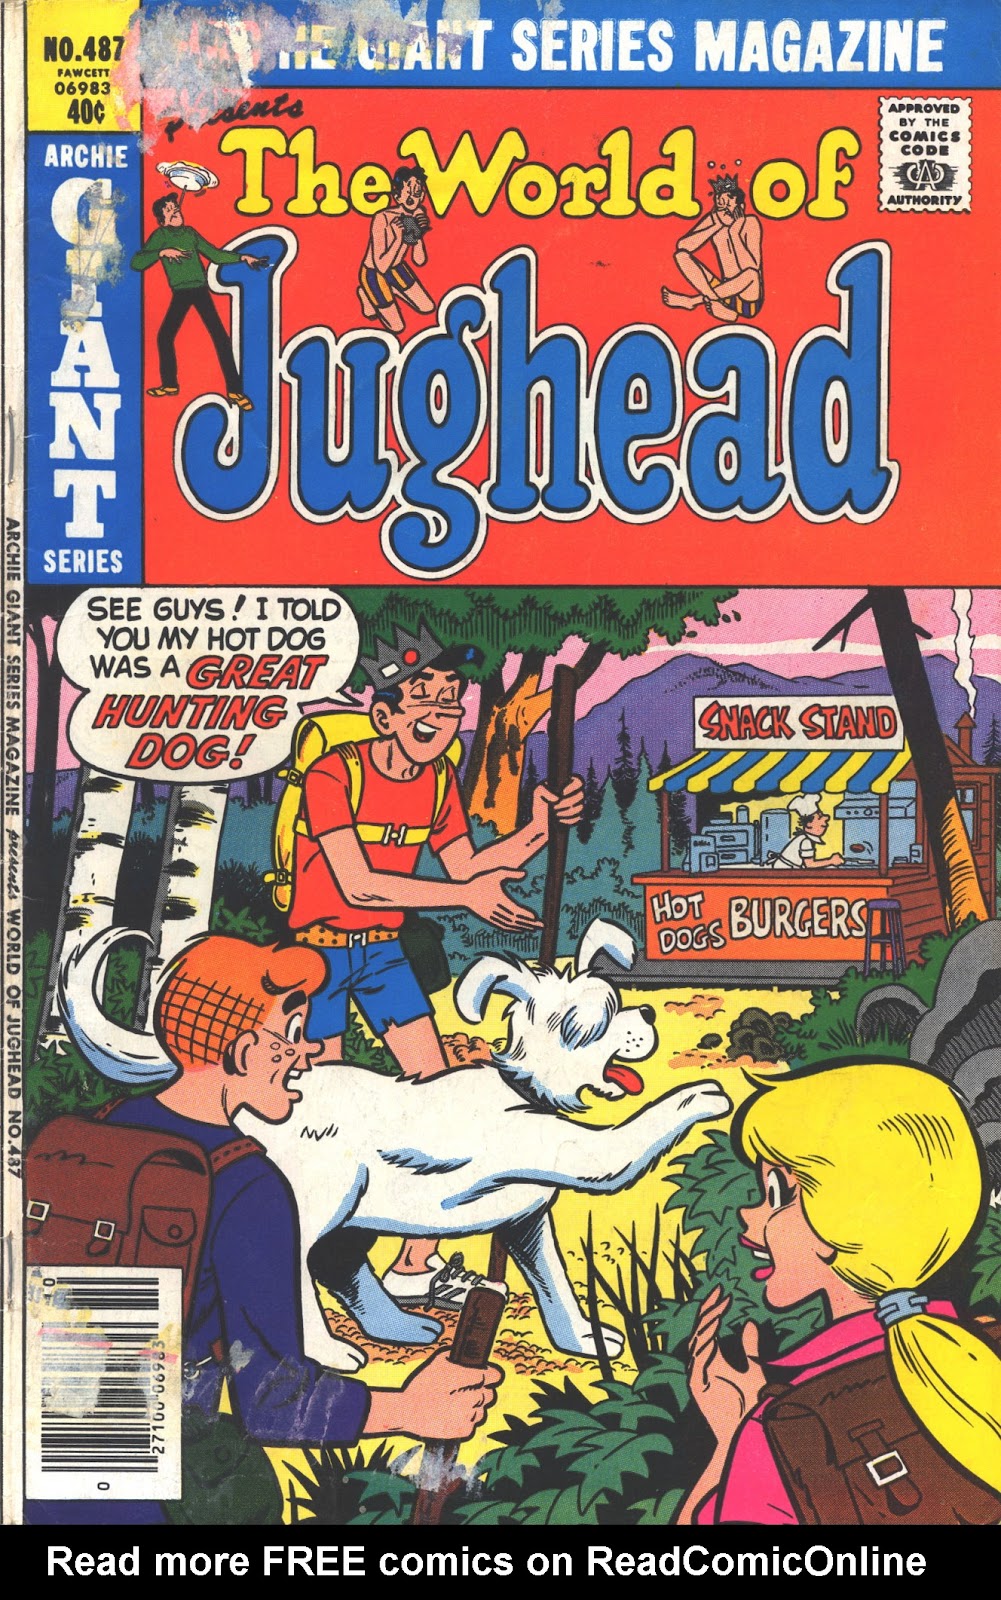 Archie Giant Series Magazine 487 Page 1